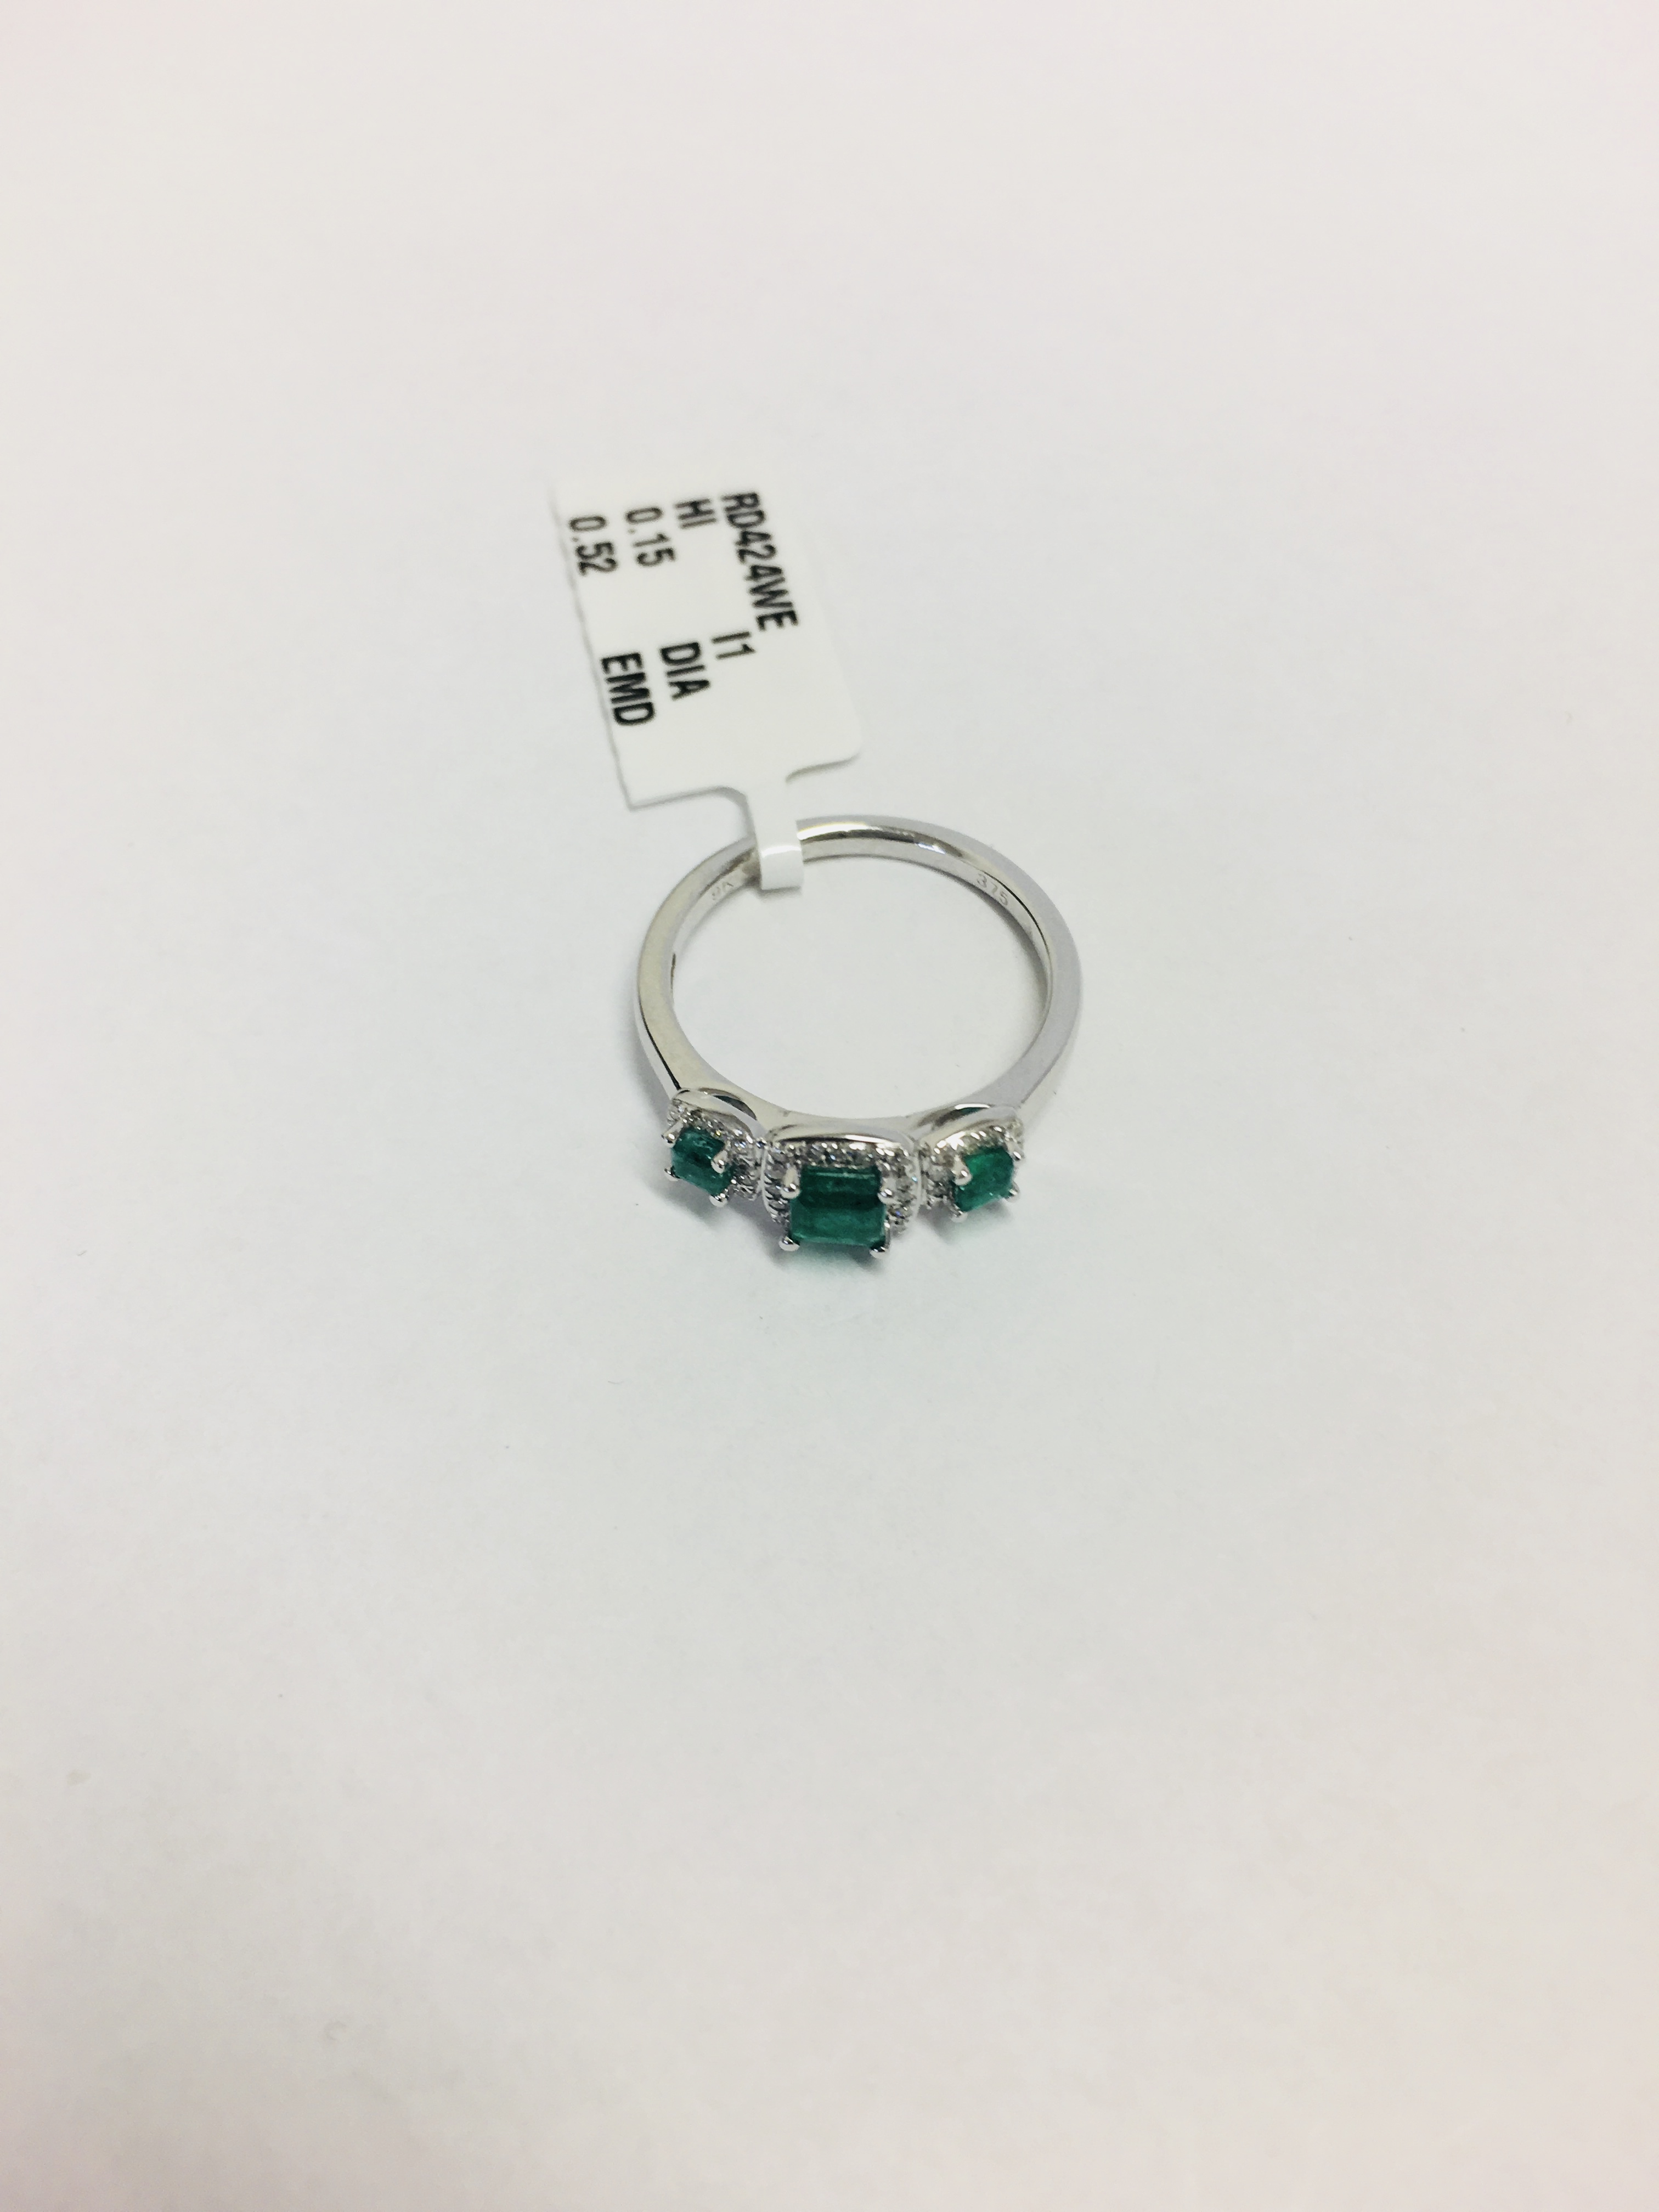 9Ct White Gold Diamond Emerald Cluster Ring, - Image 2 of 6